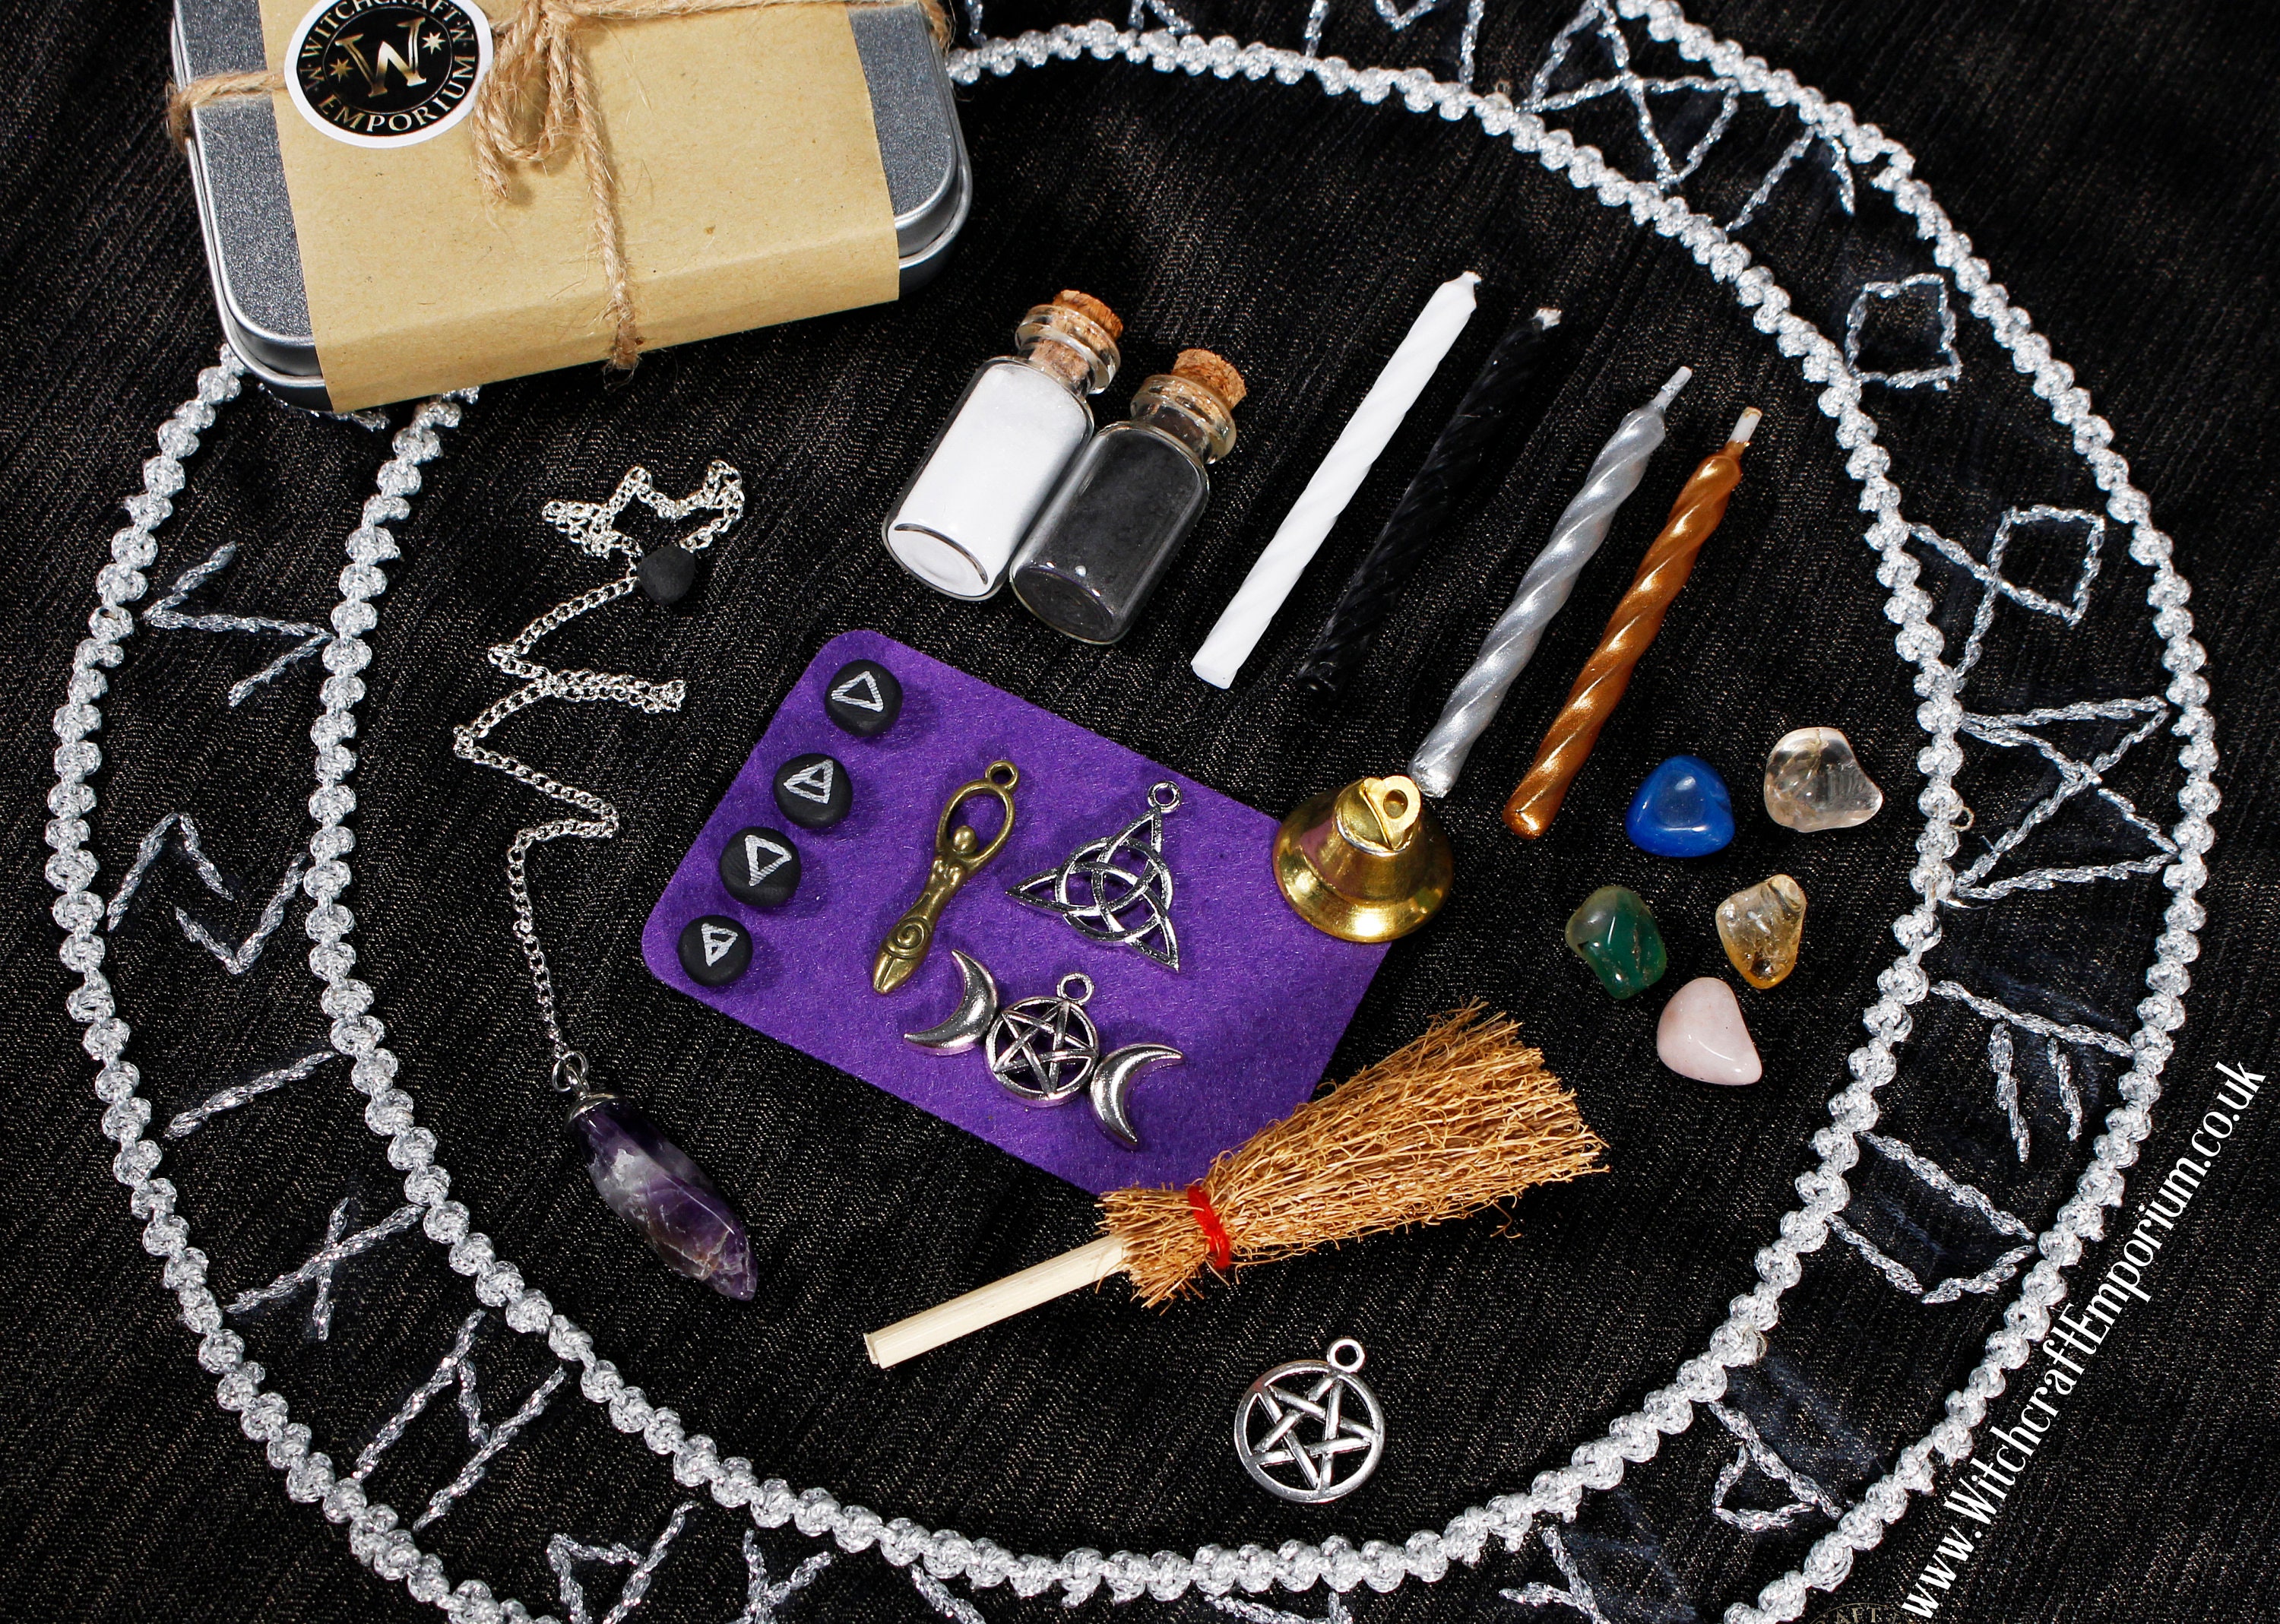 Mini Witch Kit, Altar Kit - What I Offer - Three Crows Coven